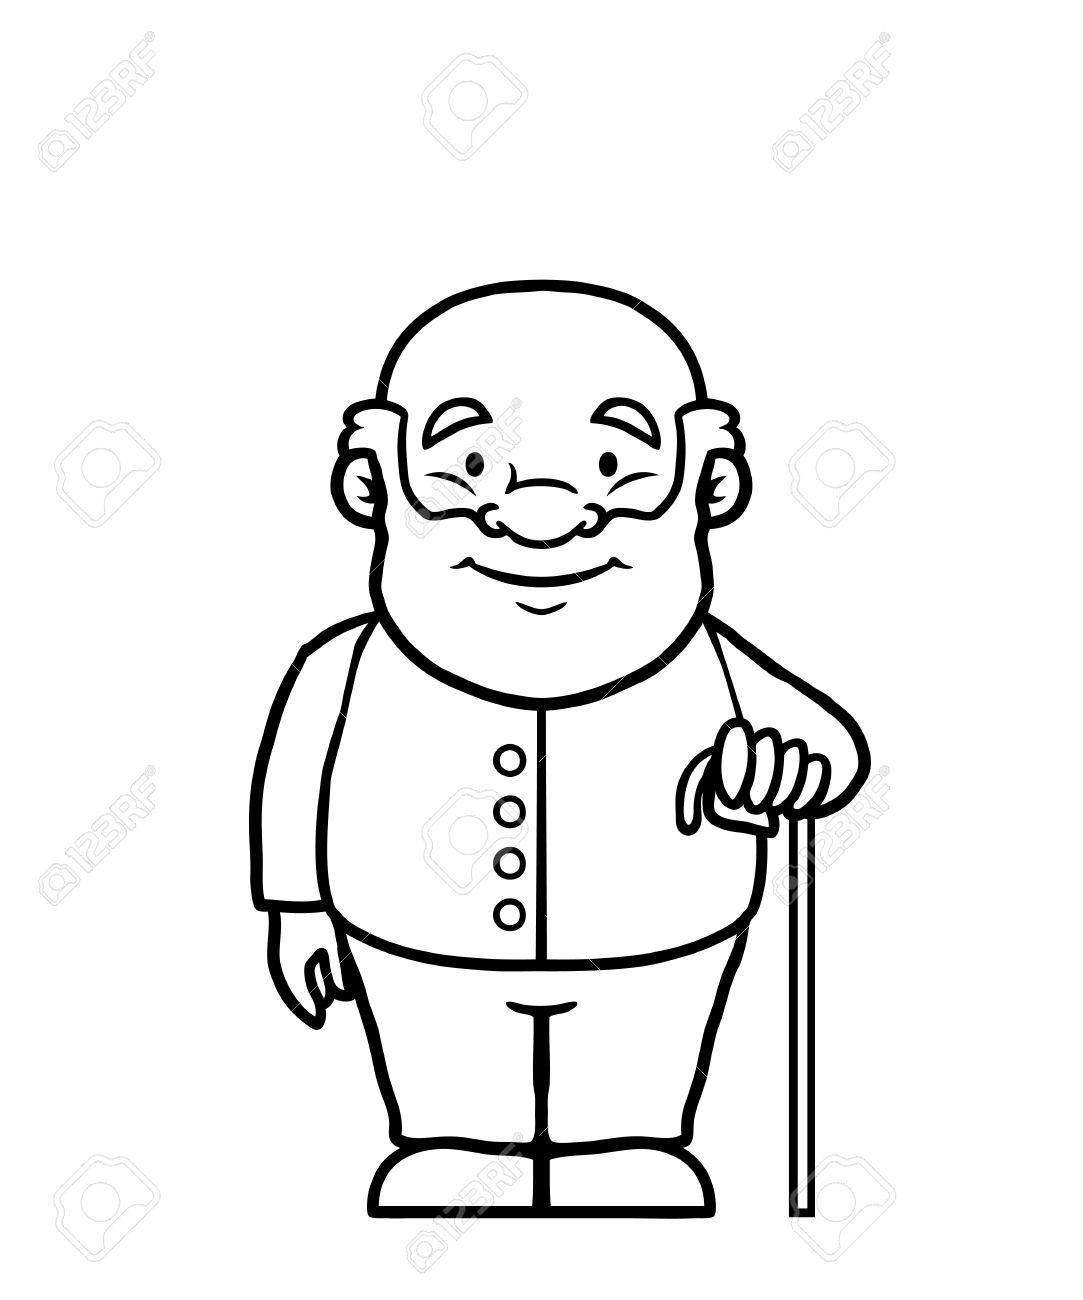 Black and white old man holding a cane » Clipart Portal.